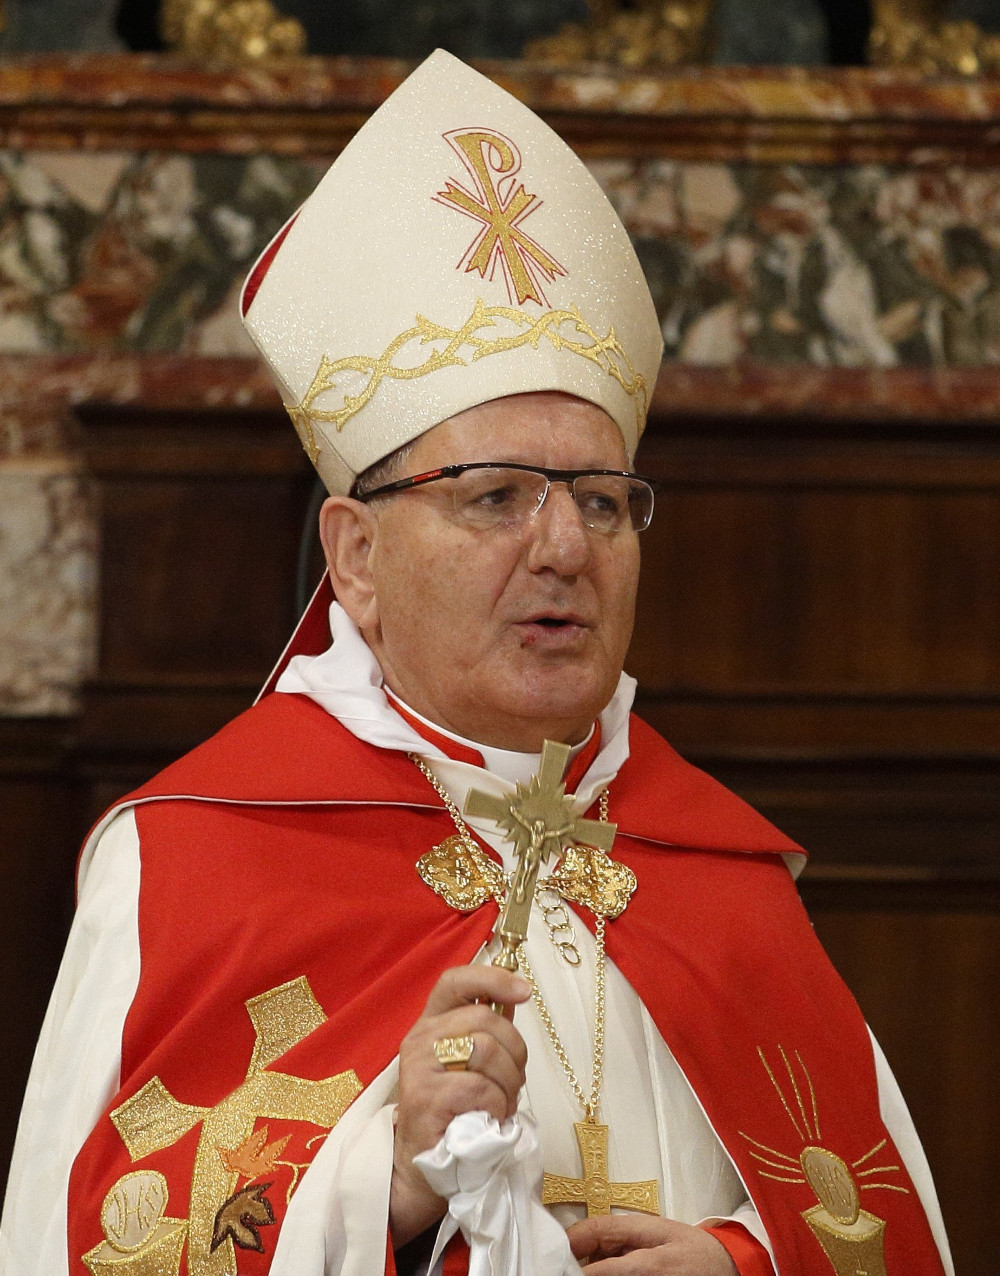 A light-skinned man wears a mitre, glasses, and red and white vestments and carries a gold crucifix